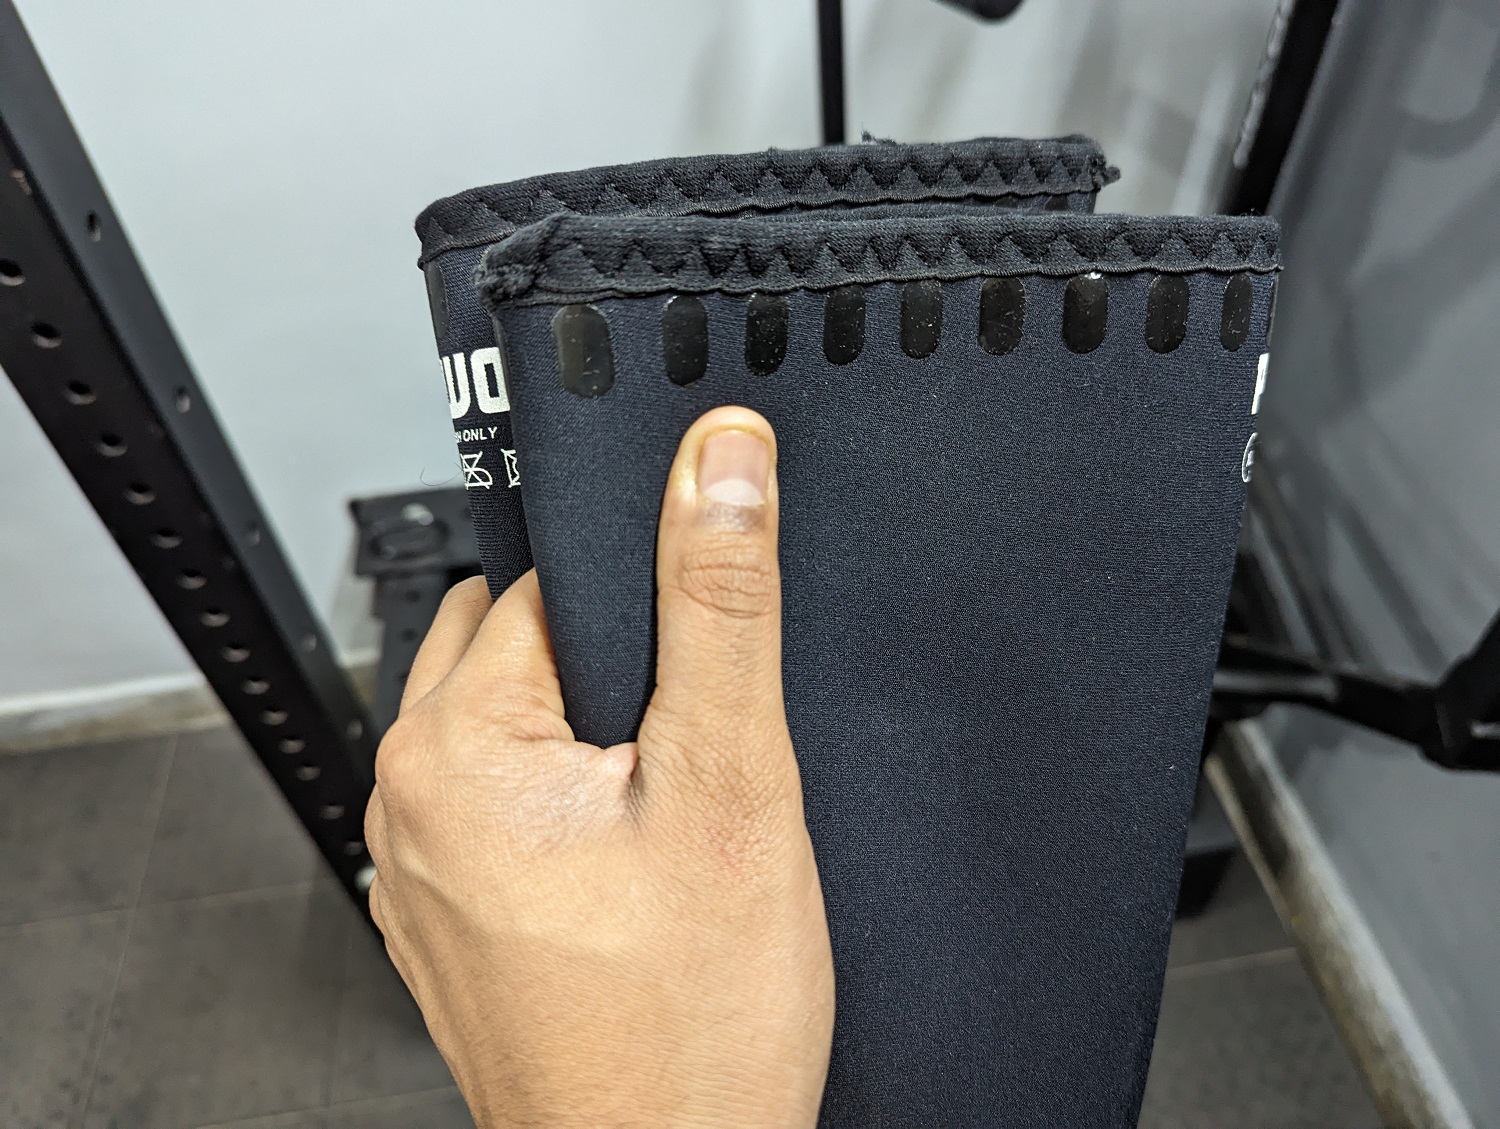 Silicon Grip on prowolf knee sleeves